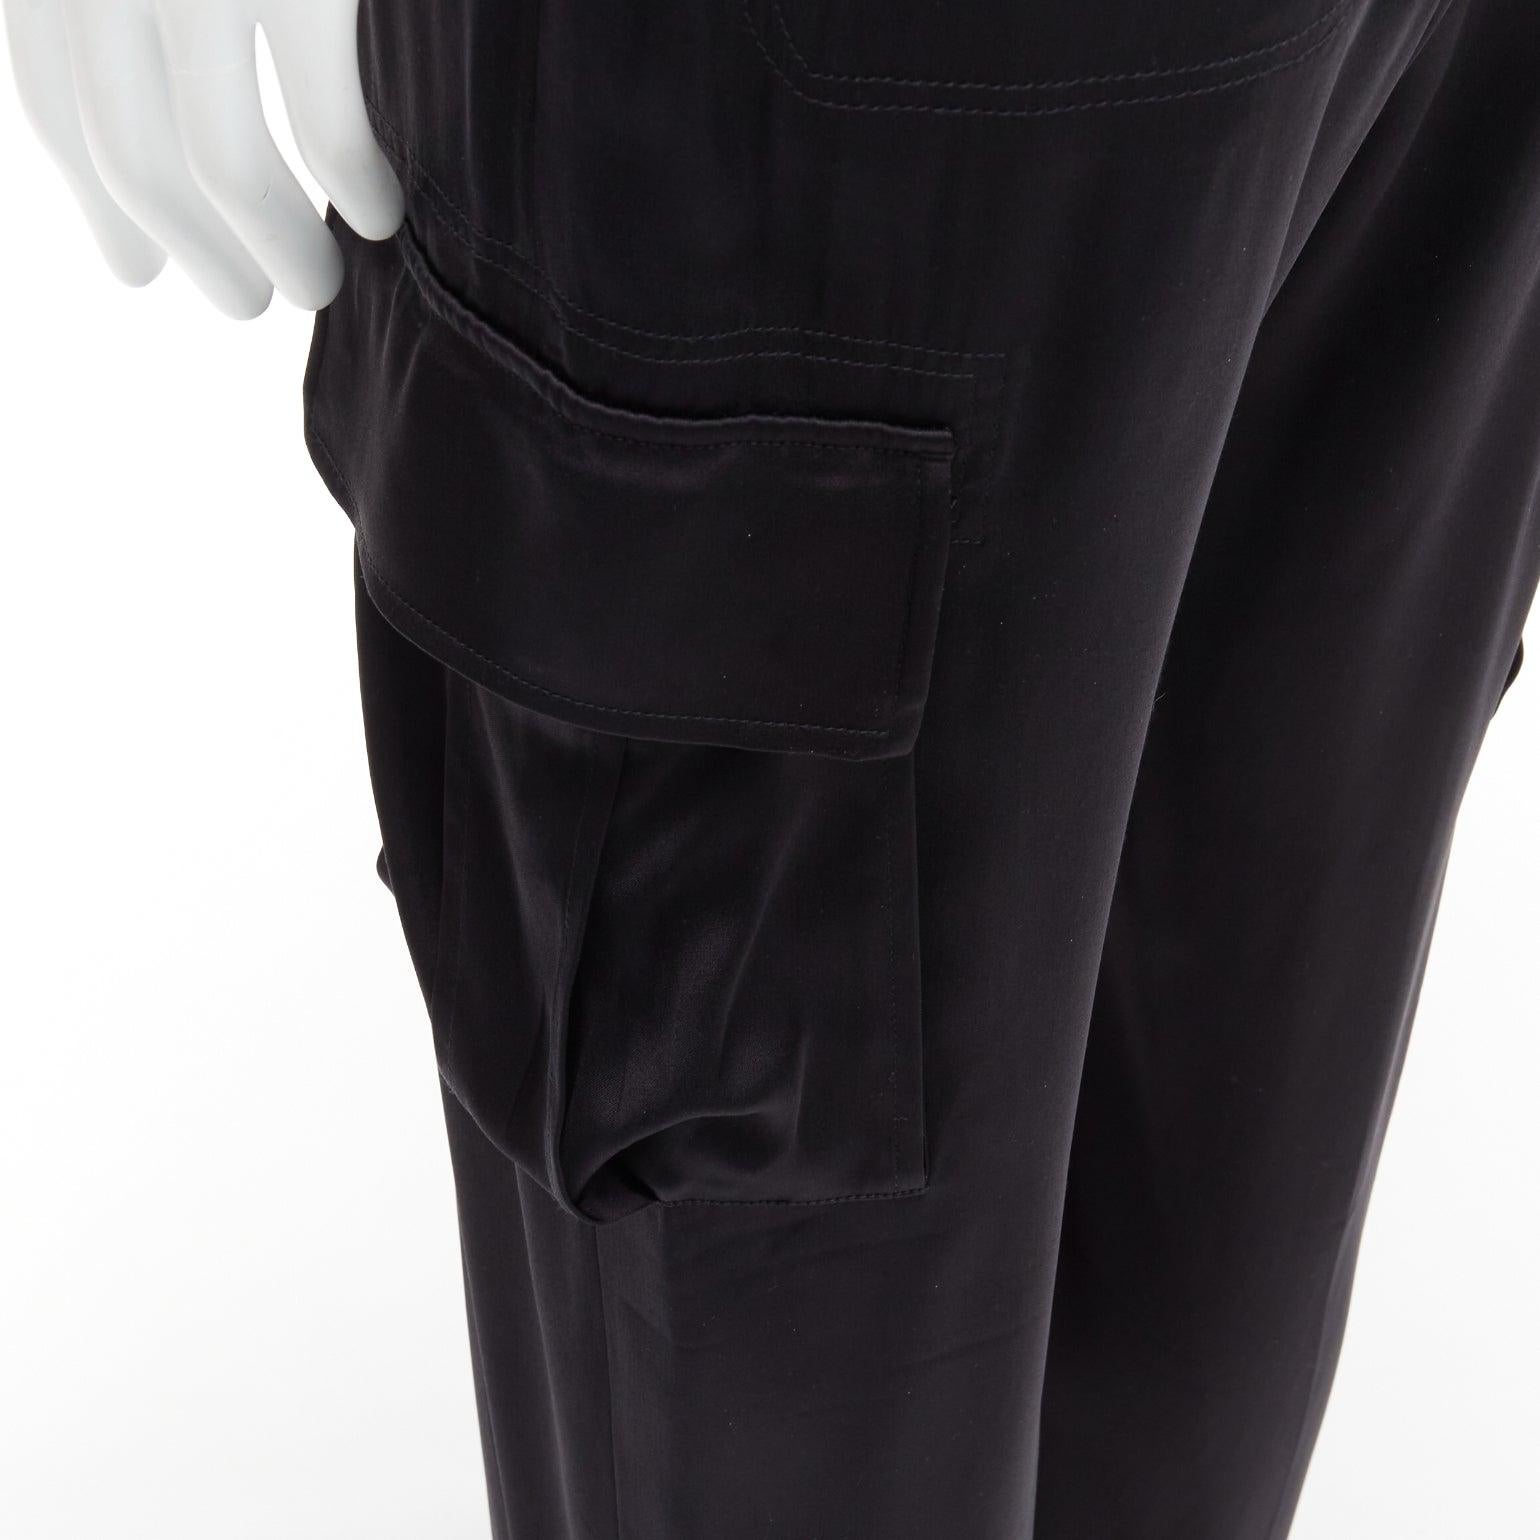 VERSACE 100% silk black cargo pockets wide leg trousers pants IT48 M
Reference: CNLE/A00276
Brand: Versace
Designer: Donatella Versace
Material: Silk
Color: Black
Pattern: Solid
Closure: Zip Fly
Lining: Black Silk
Extra Details: 2 back flap